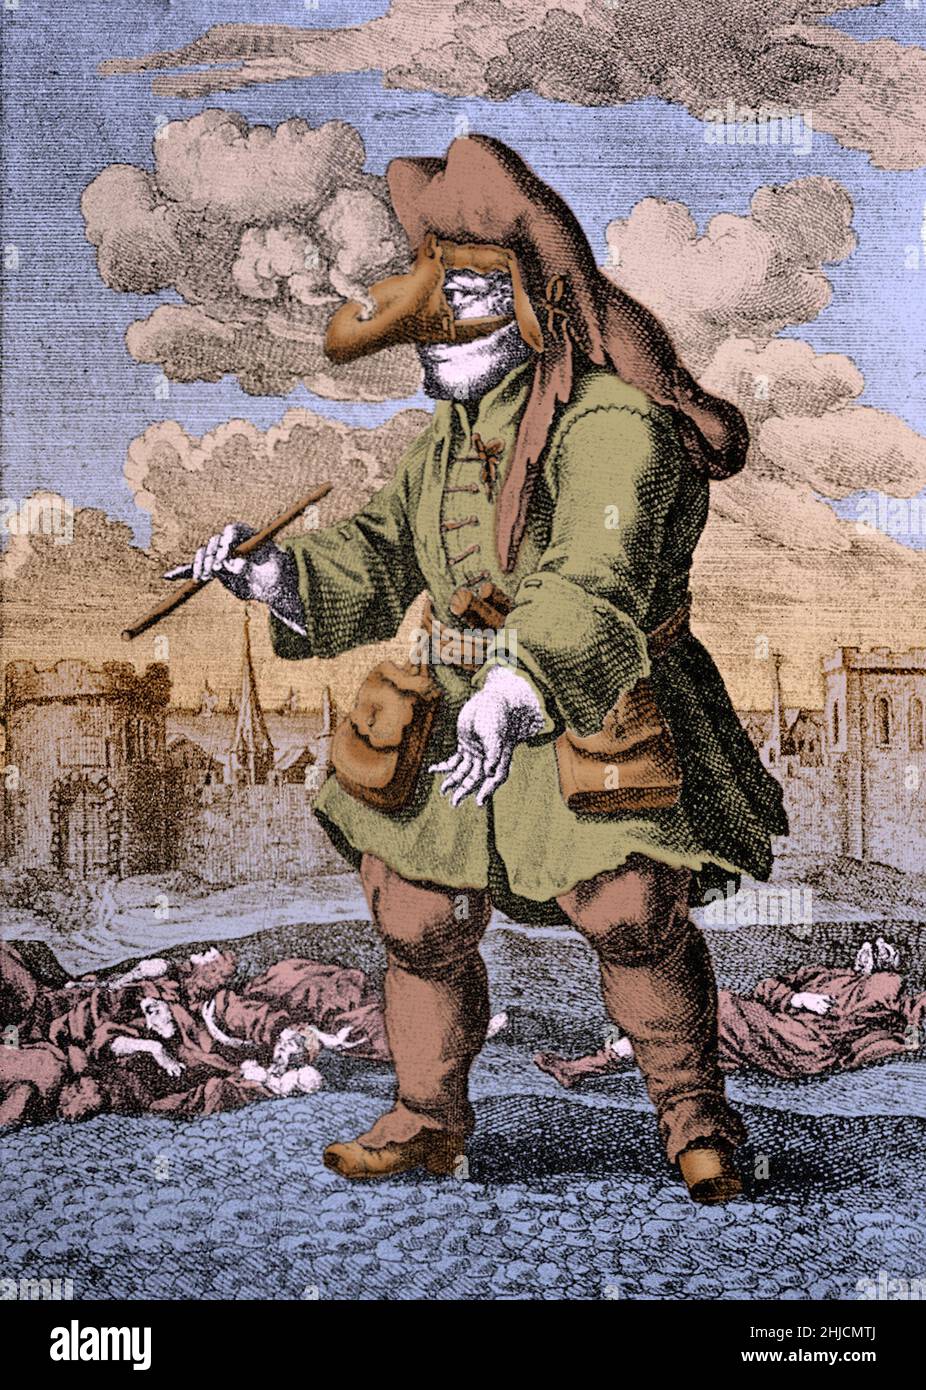 Satirical engraving of a doctor during the Great Plague of Marseille, circa 1720. Portrayed as a quack, he is wearing a nose-bag filled with smoking herbs and other items meant to repel the plague. The wand is for taking a pulse. Colorization of an etching after an illustration by Johann Melchior F√ºssli (1677‚Äì1736) circa 1721. Stock Photo